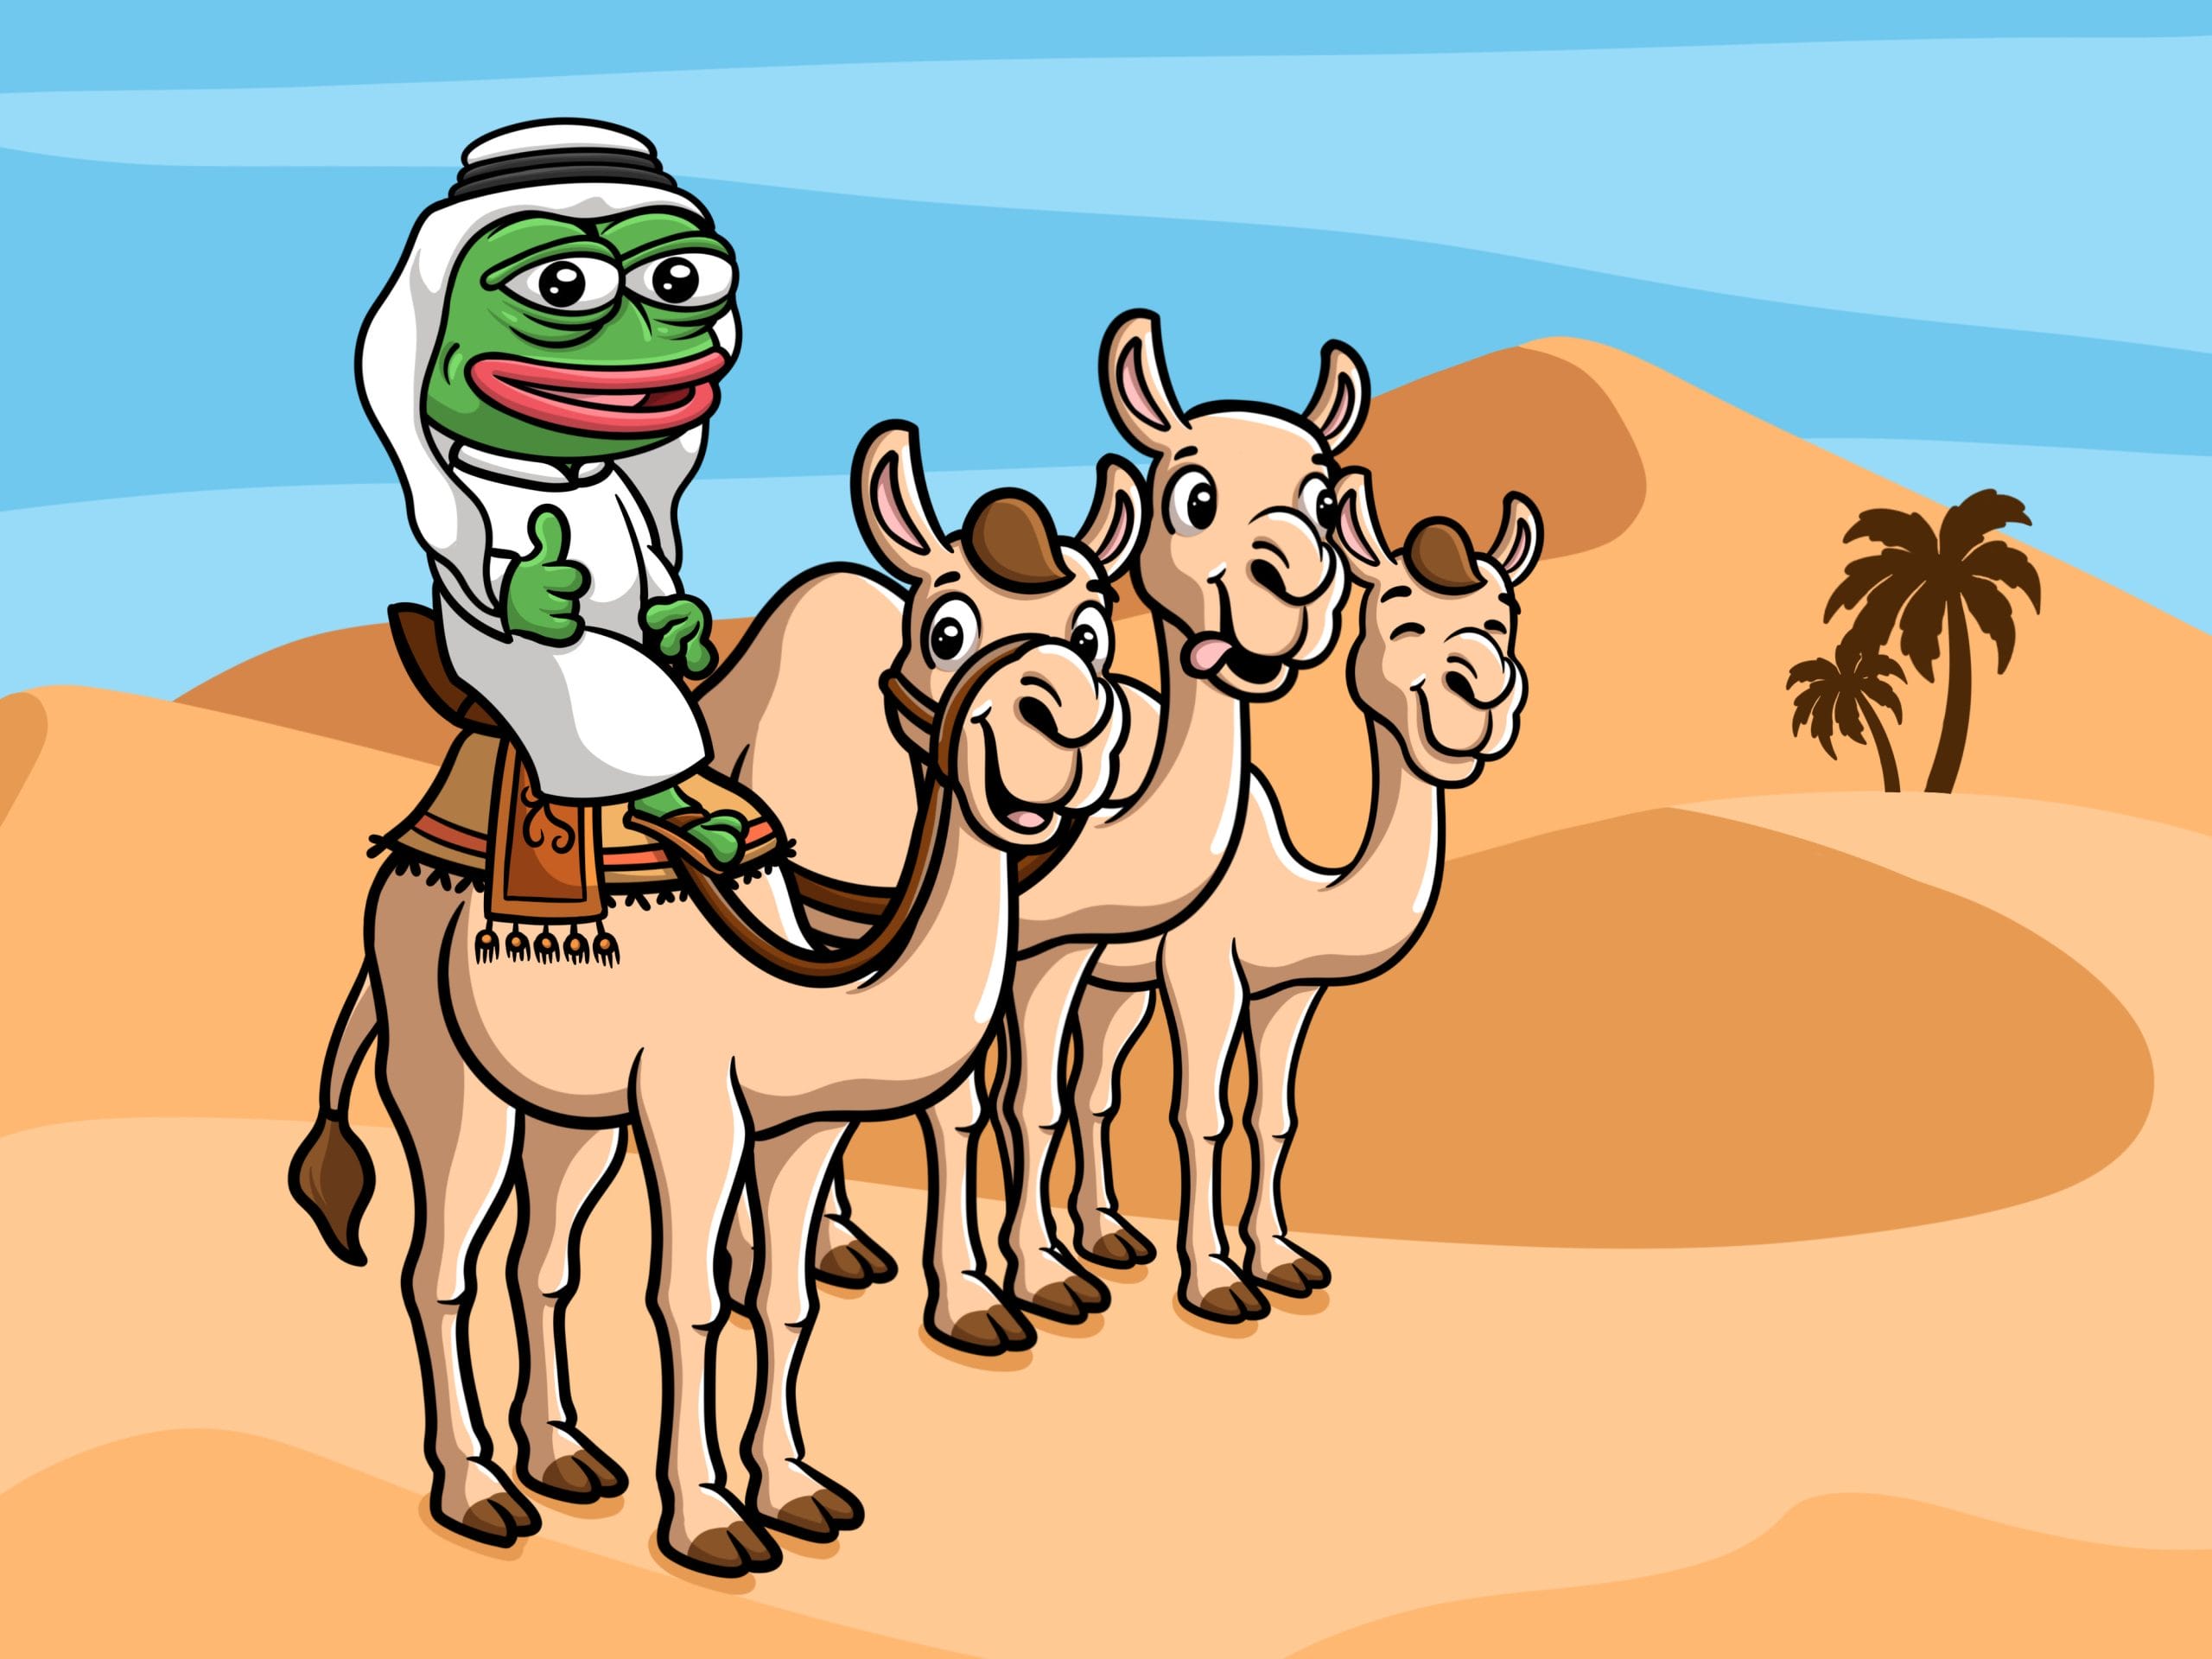 SAUDIPEPE Token is the Latest Token to Shoot Up 18,986% and This AI Meme Coin Could Be Next